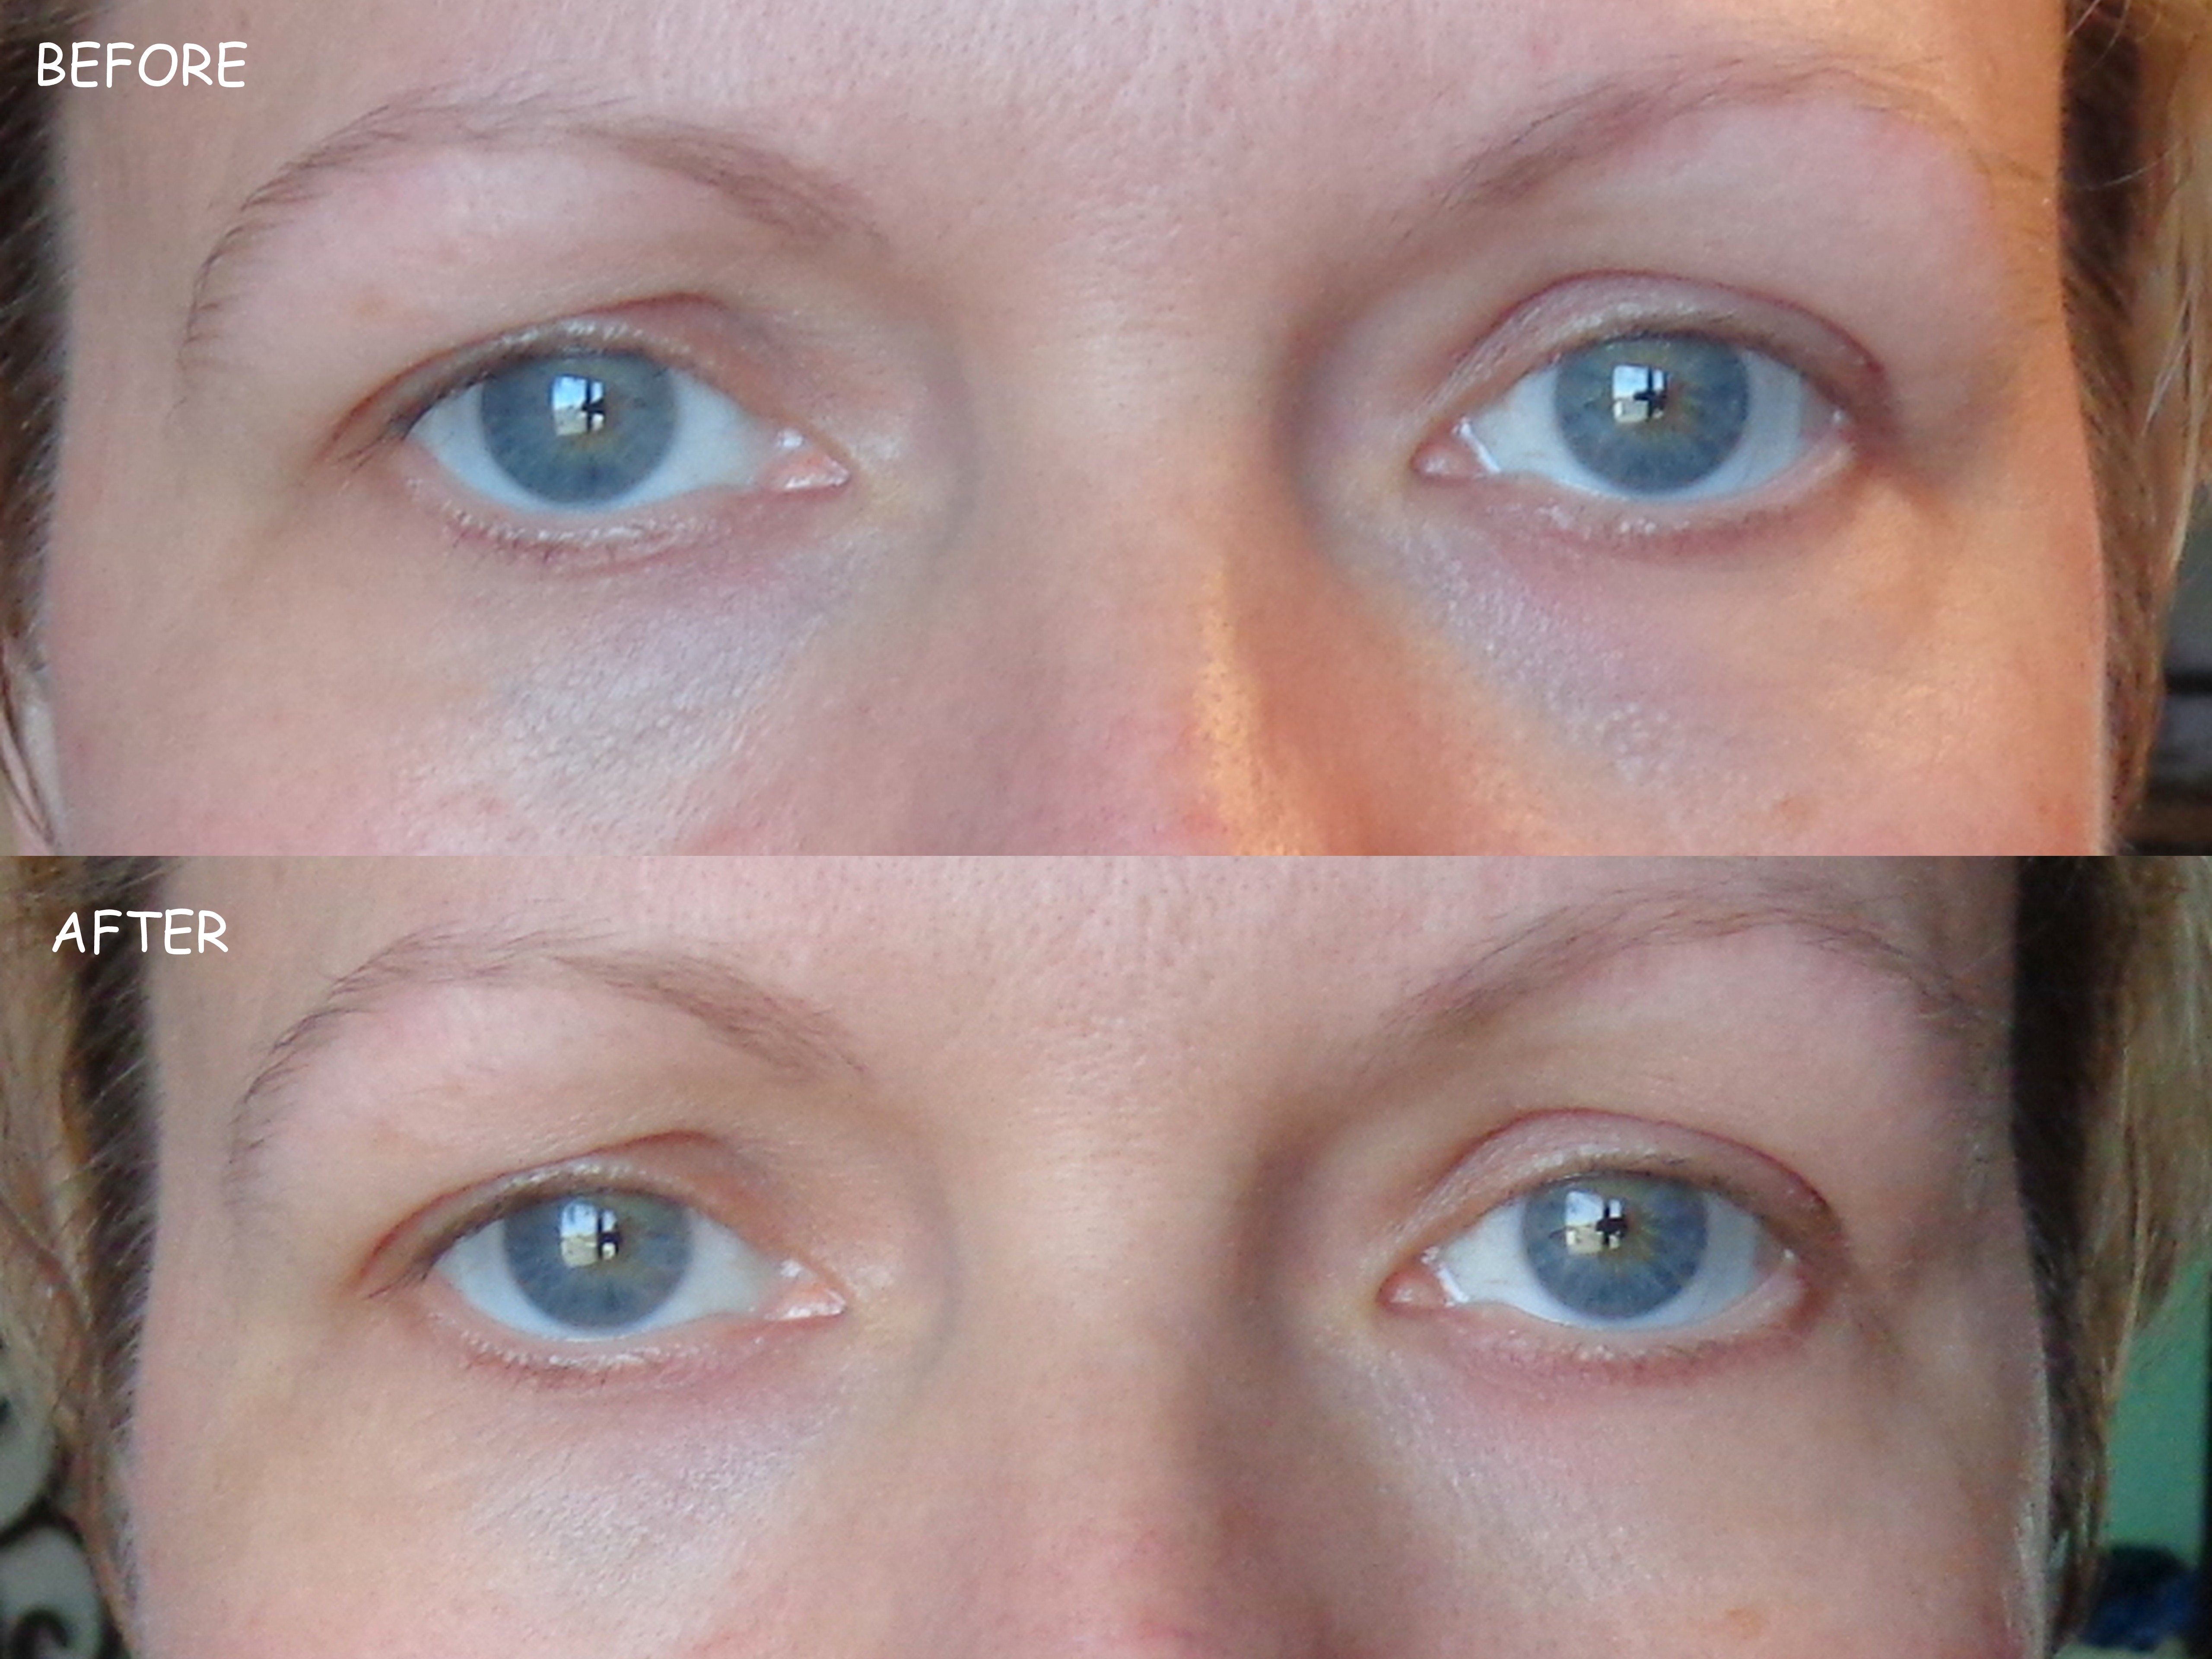 Sudden Change Brings Results for Your Under-Eye Area - My Highest Self